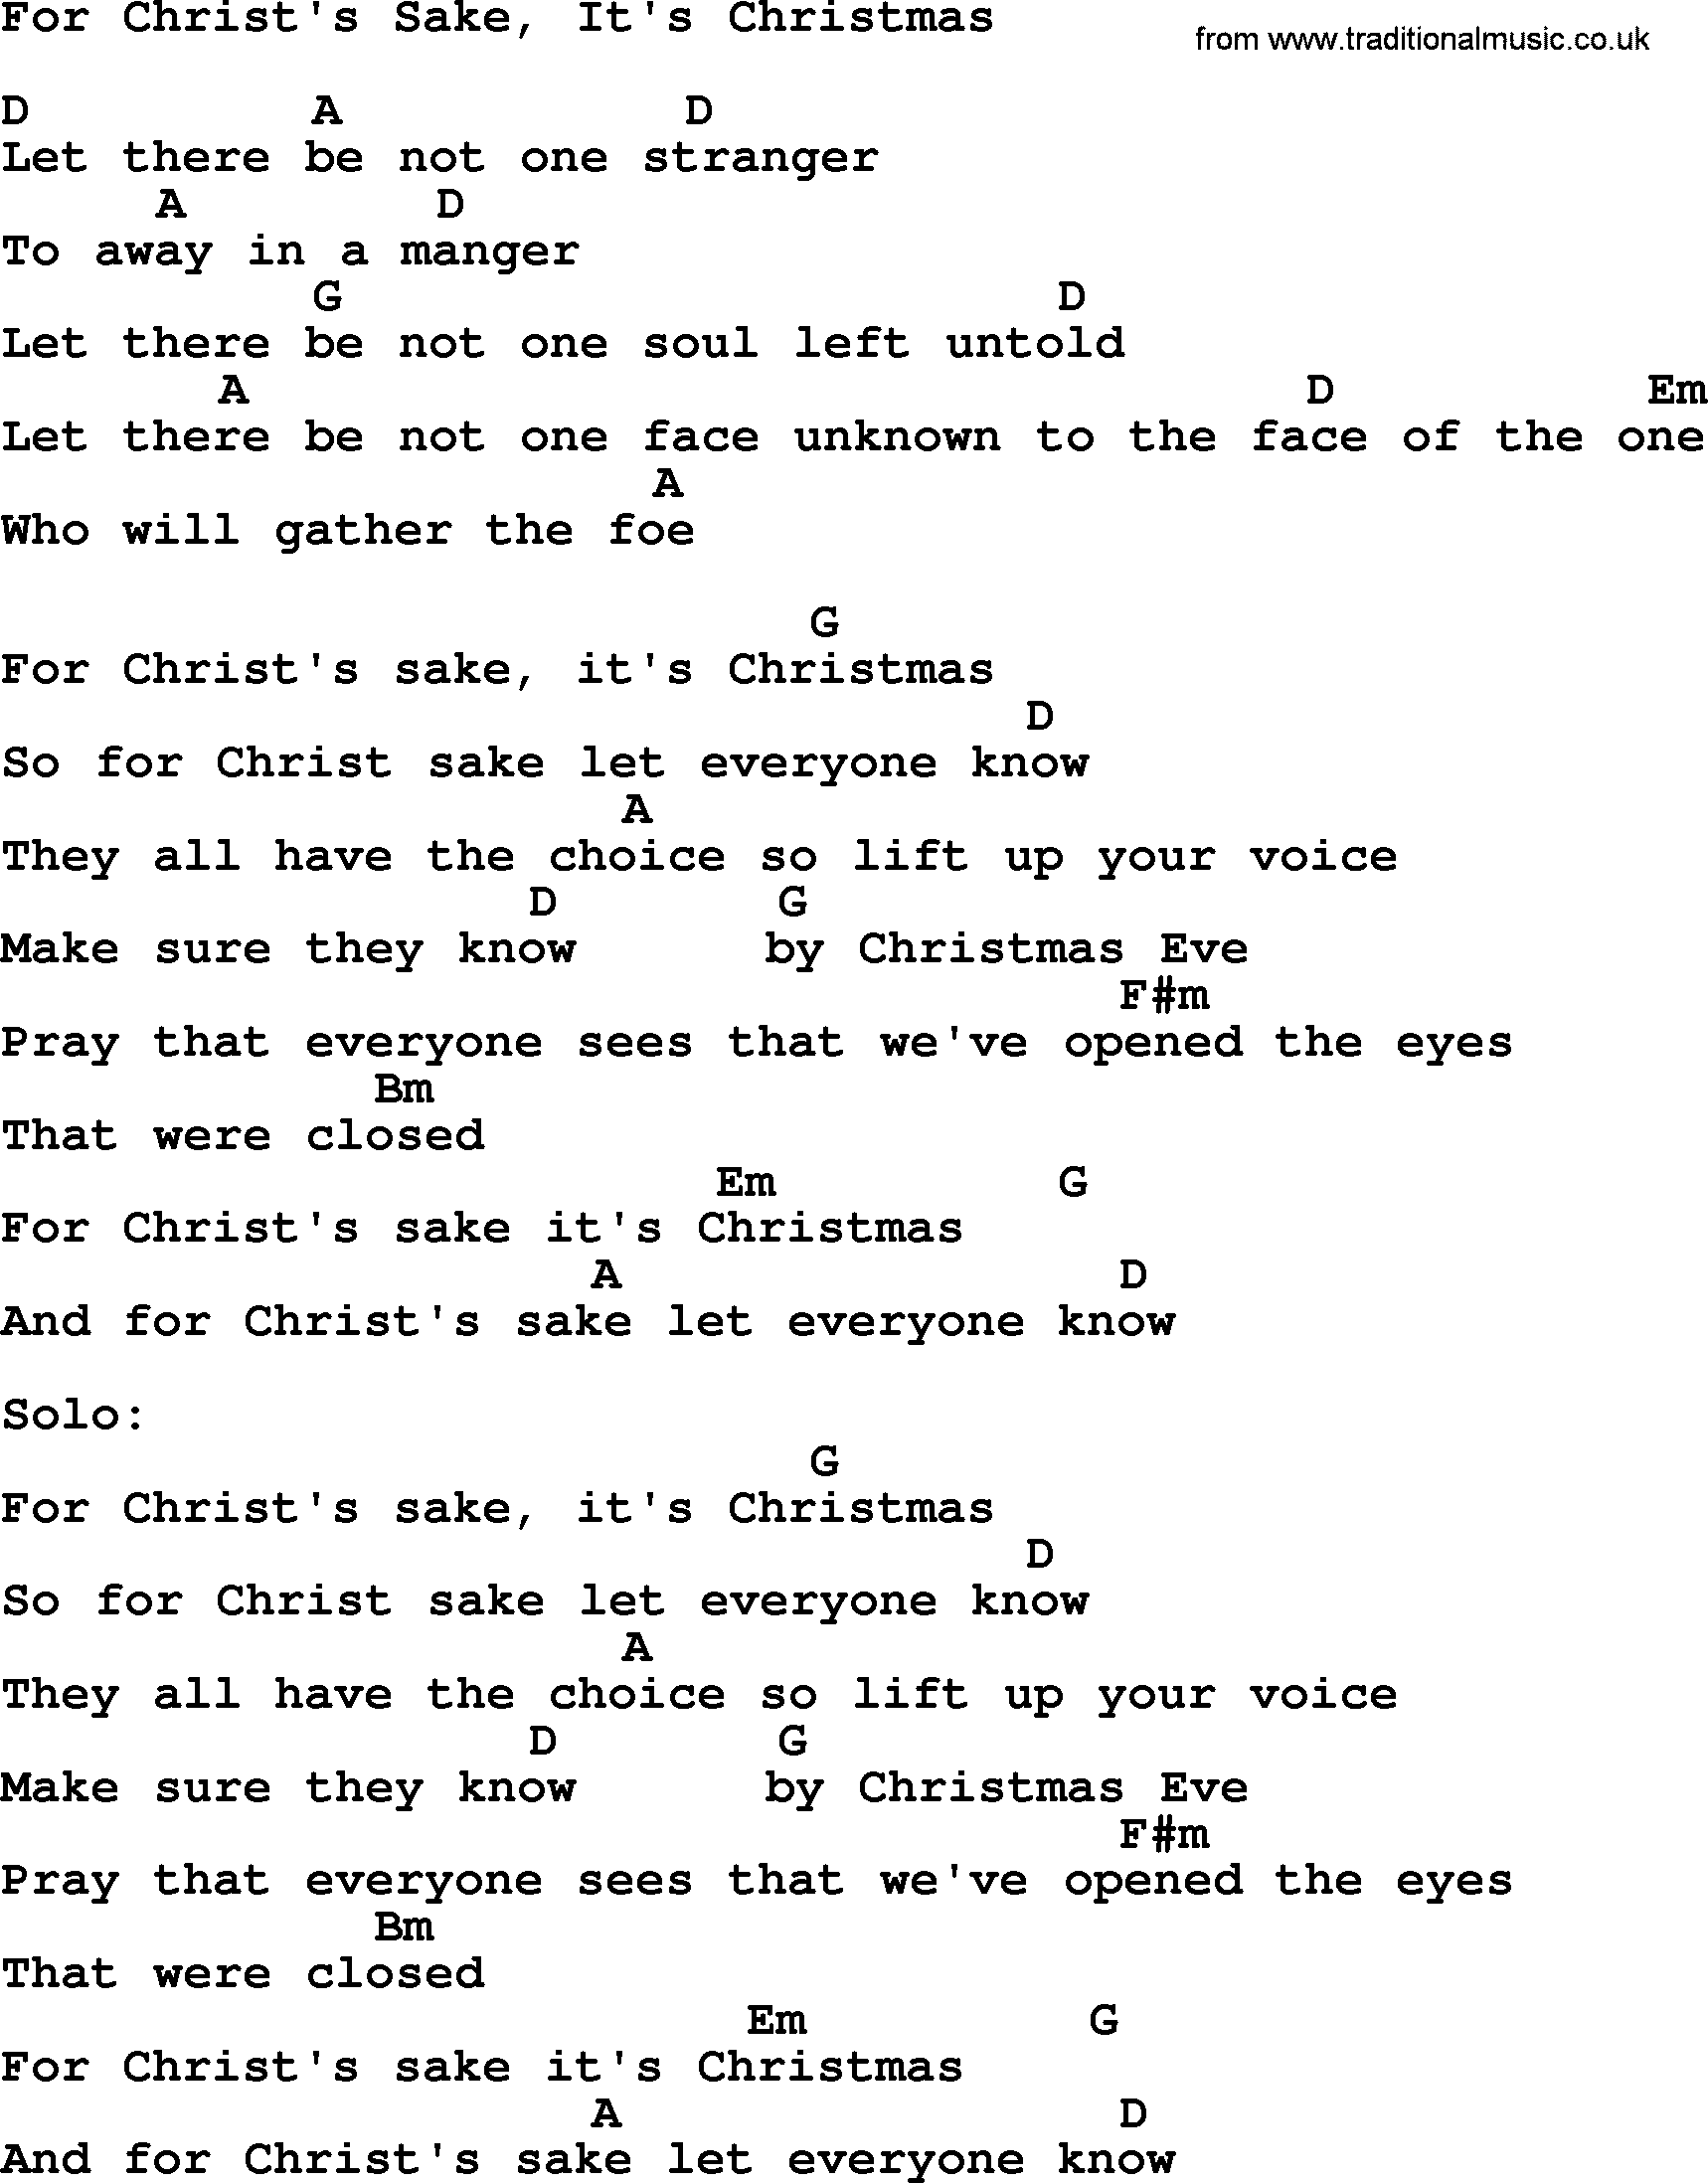 George Strait song: For Christ's Sake, It's Christmas, lyrics and chords